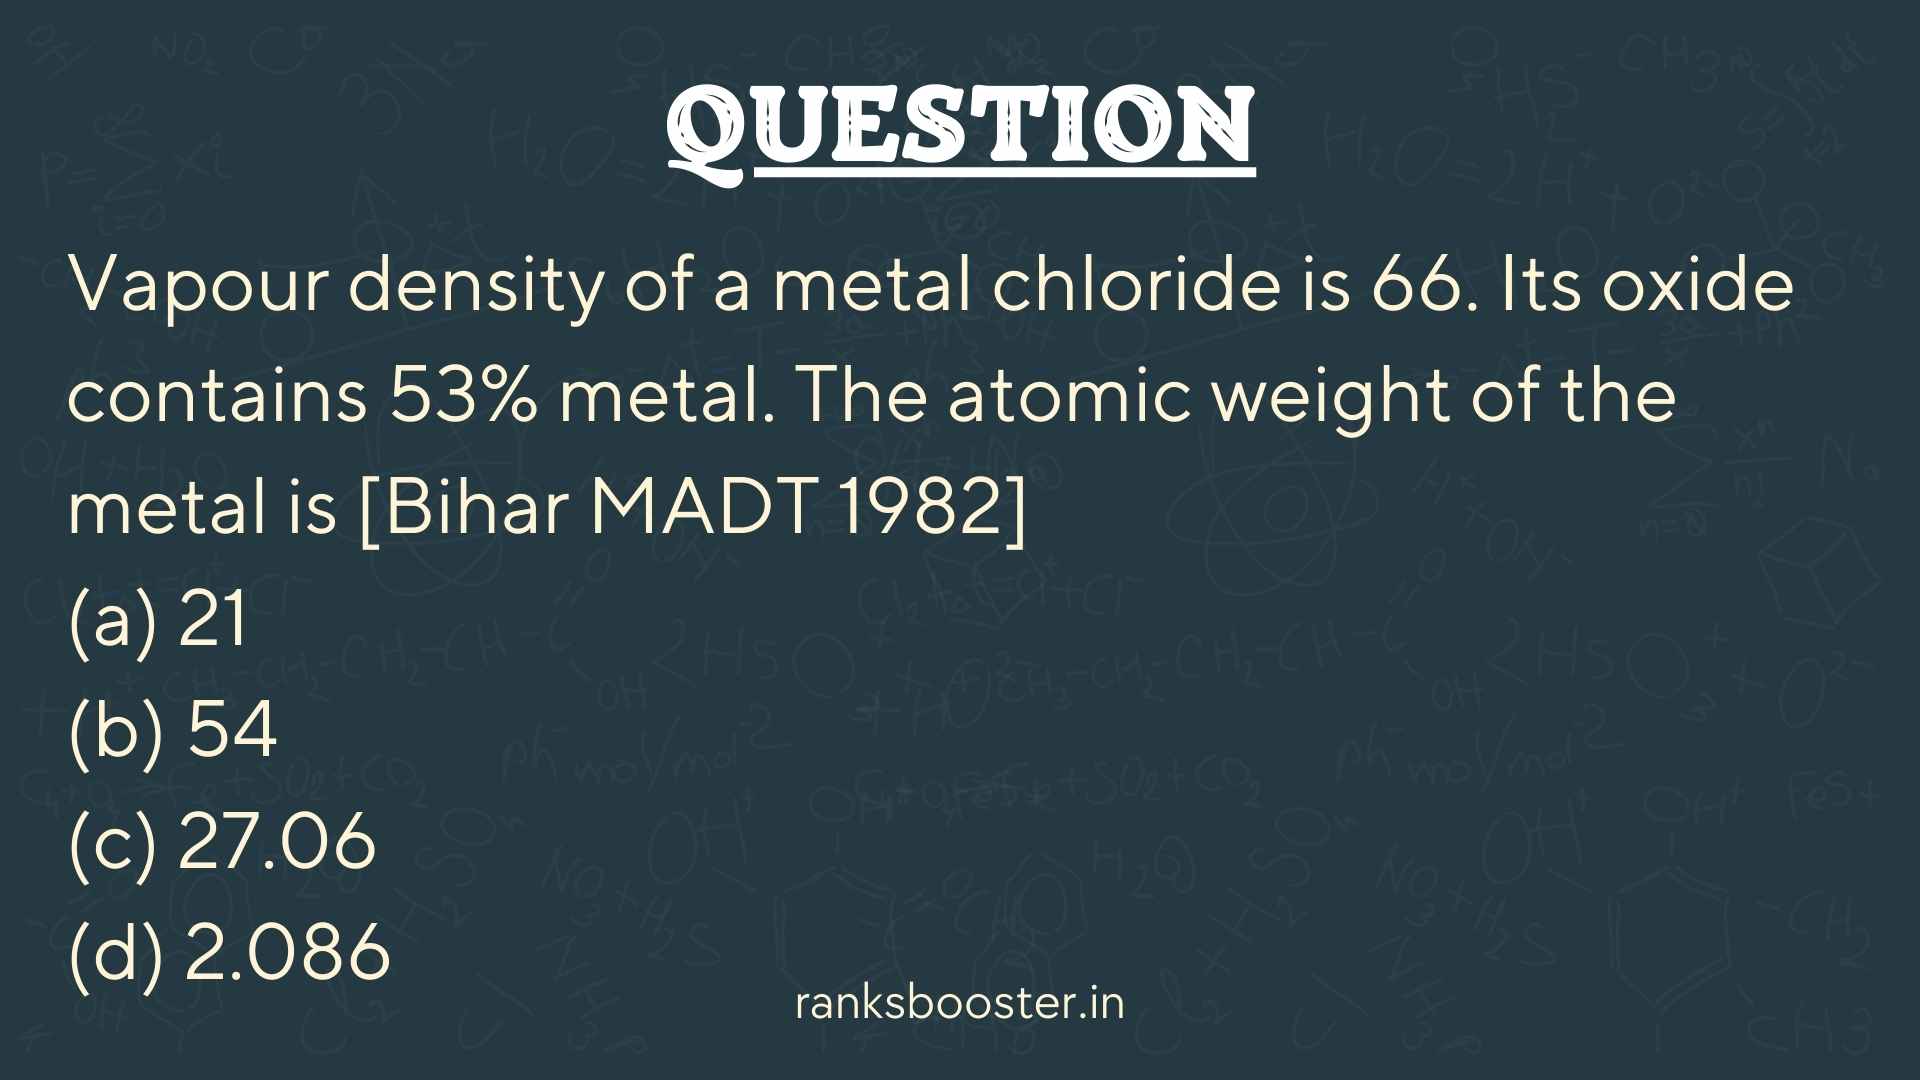 Vapour density of a metal chloride is 66. Its oxide contains 53% metal. The atomic weight of the metal is [Bihar MADT 1982] (a) 21 (b) 54 (c) 27.06 (d) 2.086